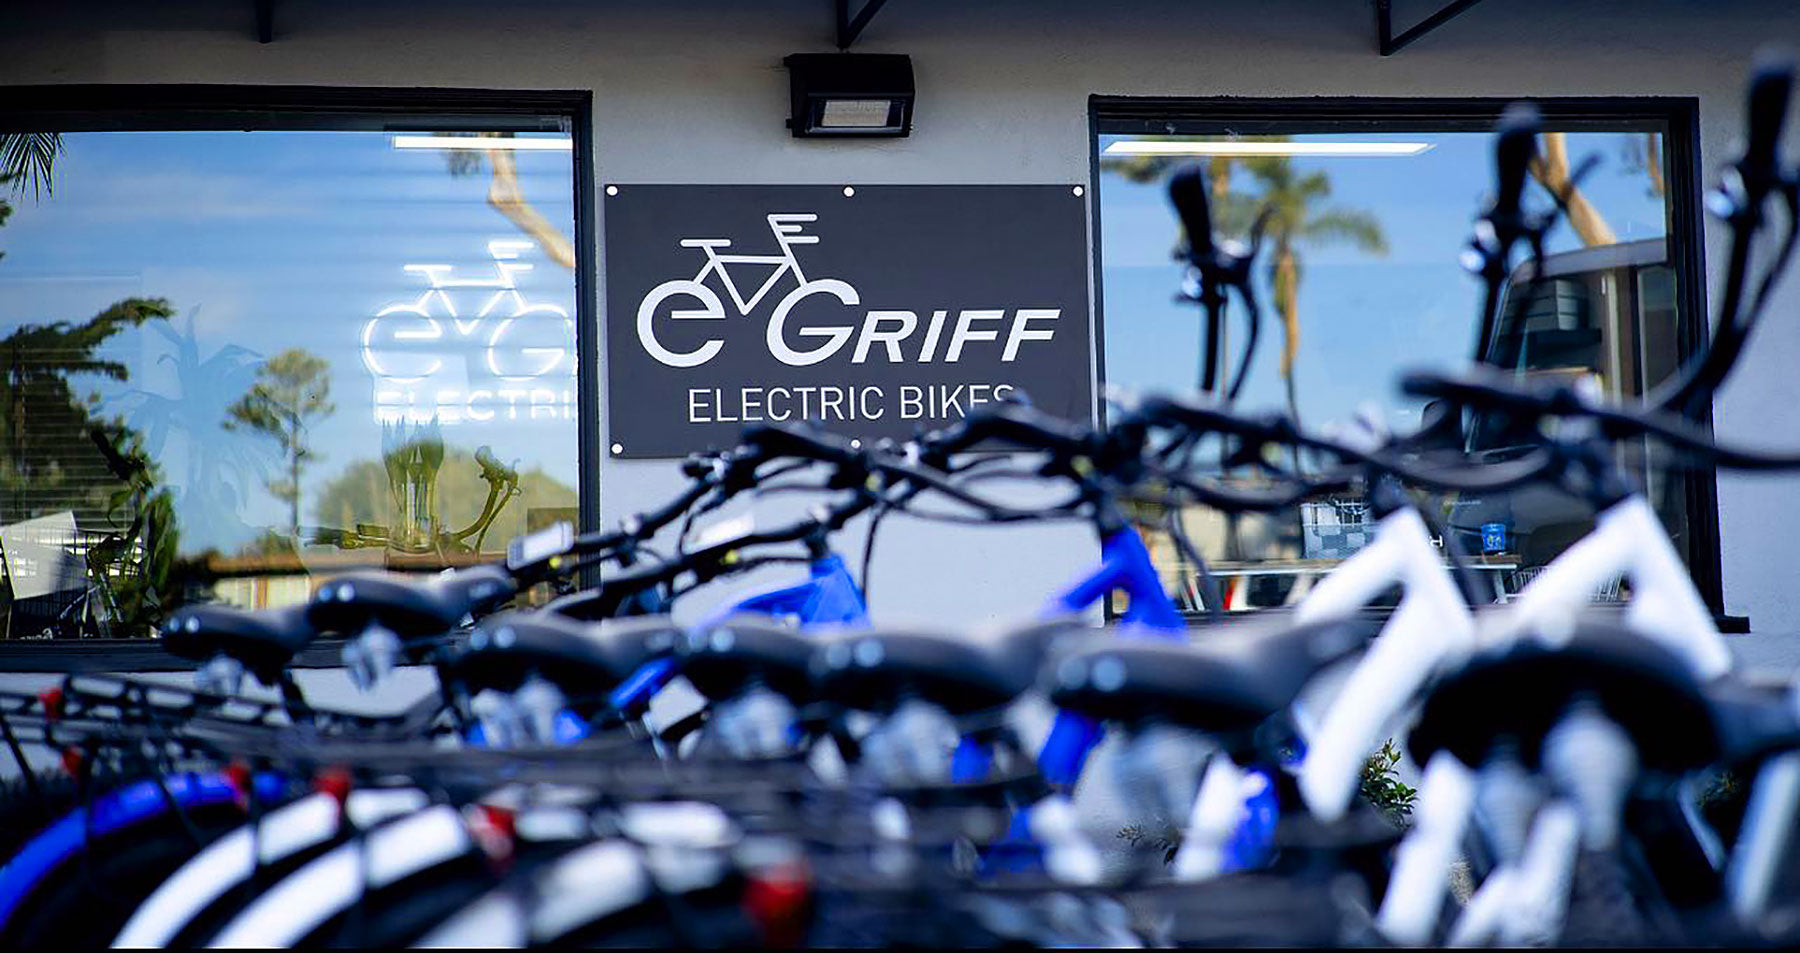 Renting a Griff e-bike for your summer adventures